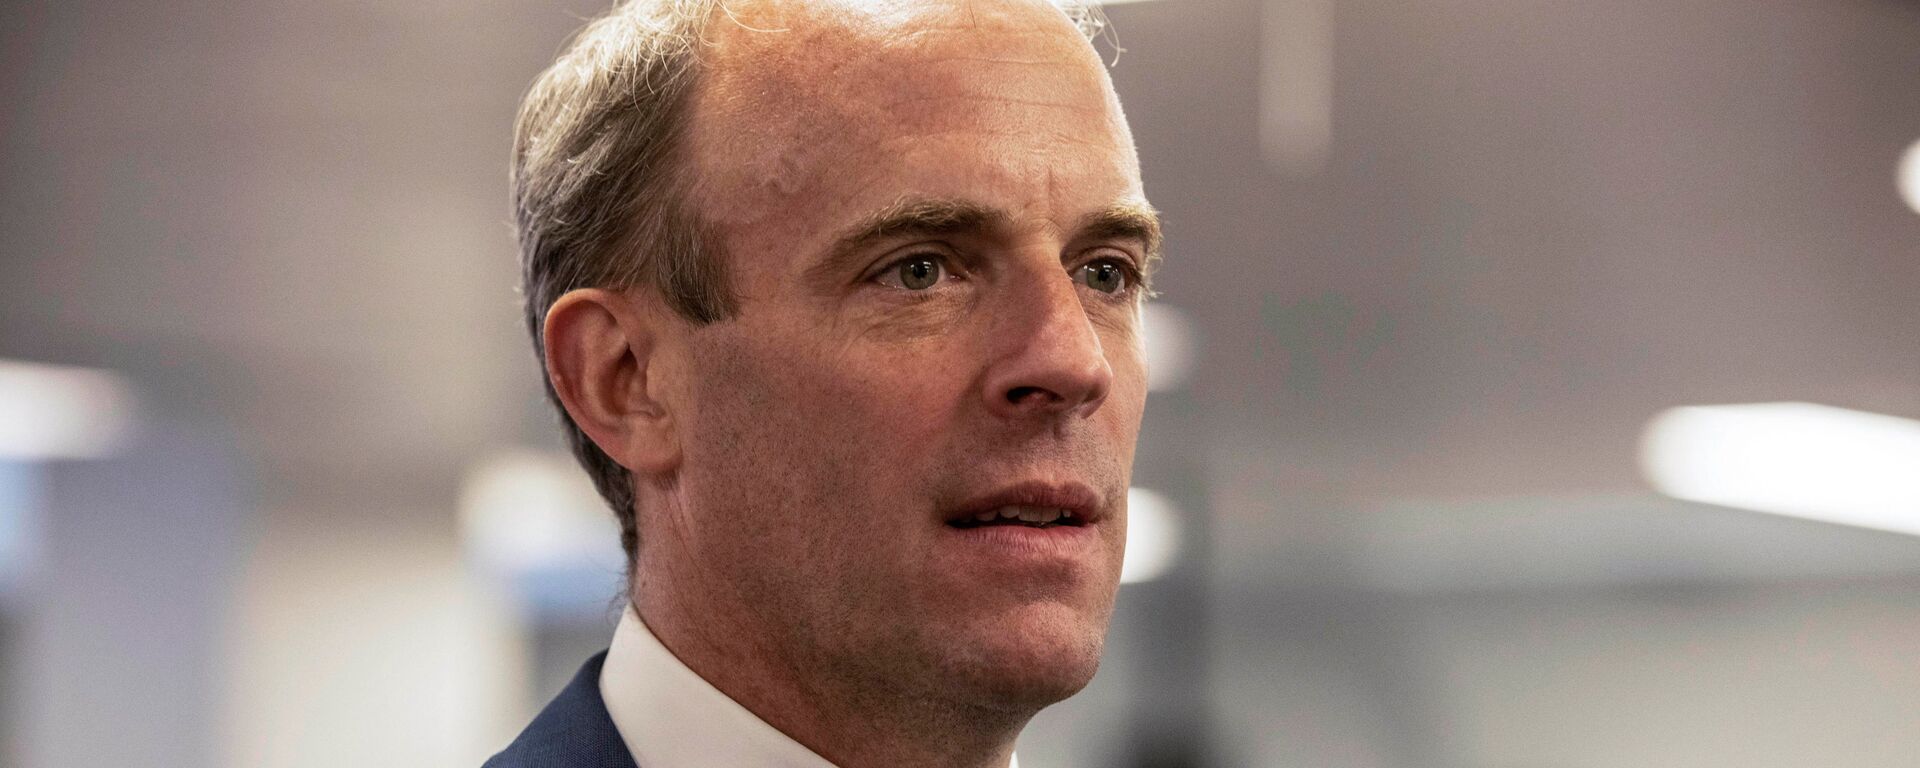 Britain's Foreign Secretary Dominic Raab looks on during a visit of Britain's Prime Minister Boris Johnson at the The Foreign, Commonwealth and Development Office (FCDO) Crisis Centre in London, Britain August 27, 2021 - Sputnik International, 1920, 30.08.2021